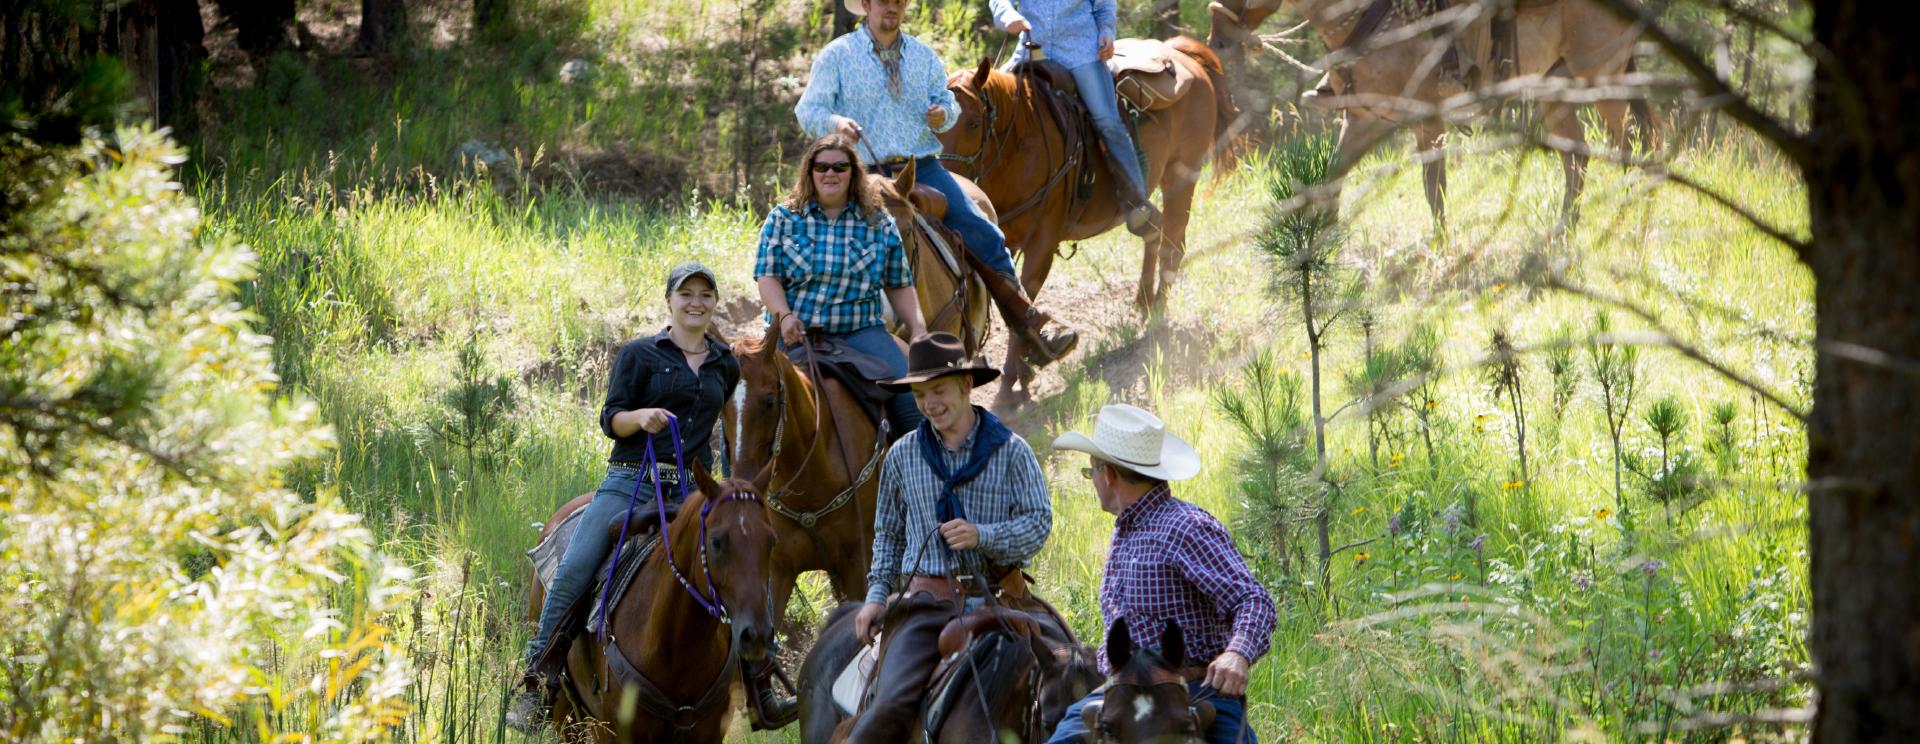 Trail Rides at Blue Bell Stables